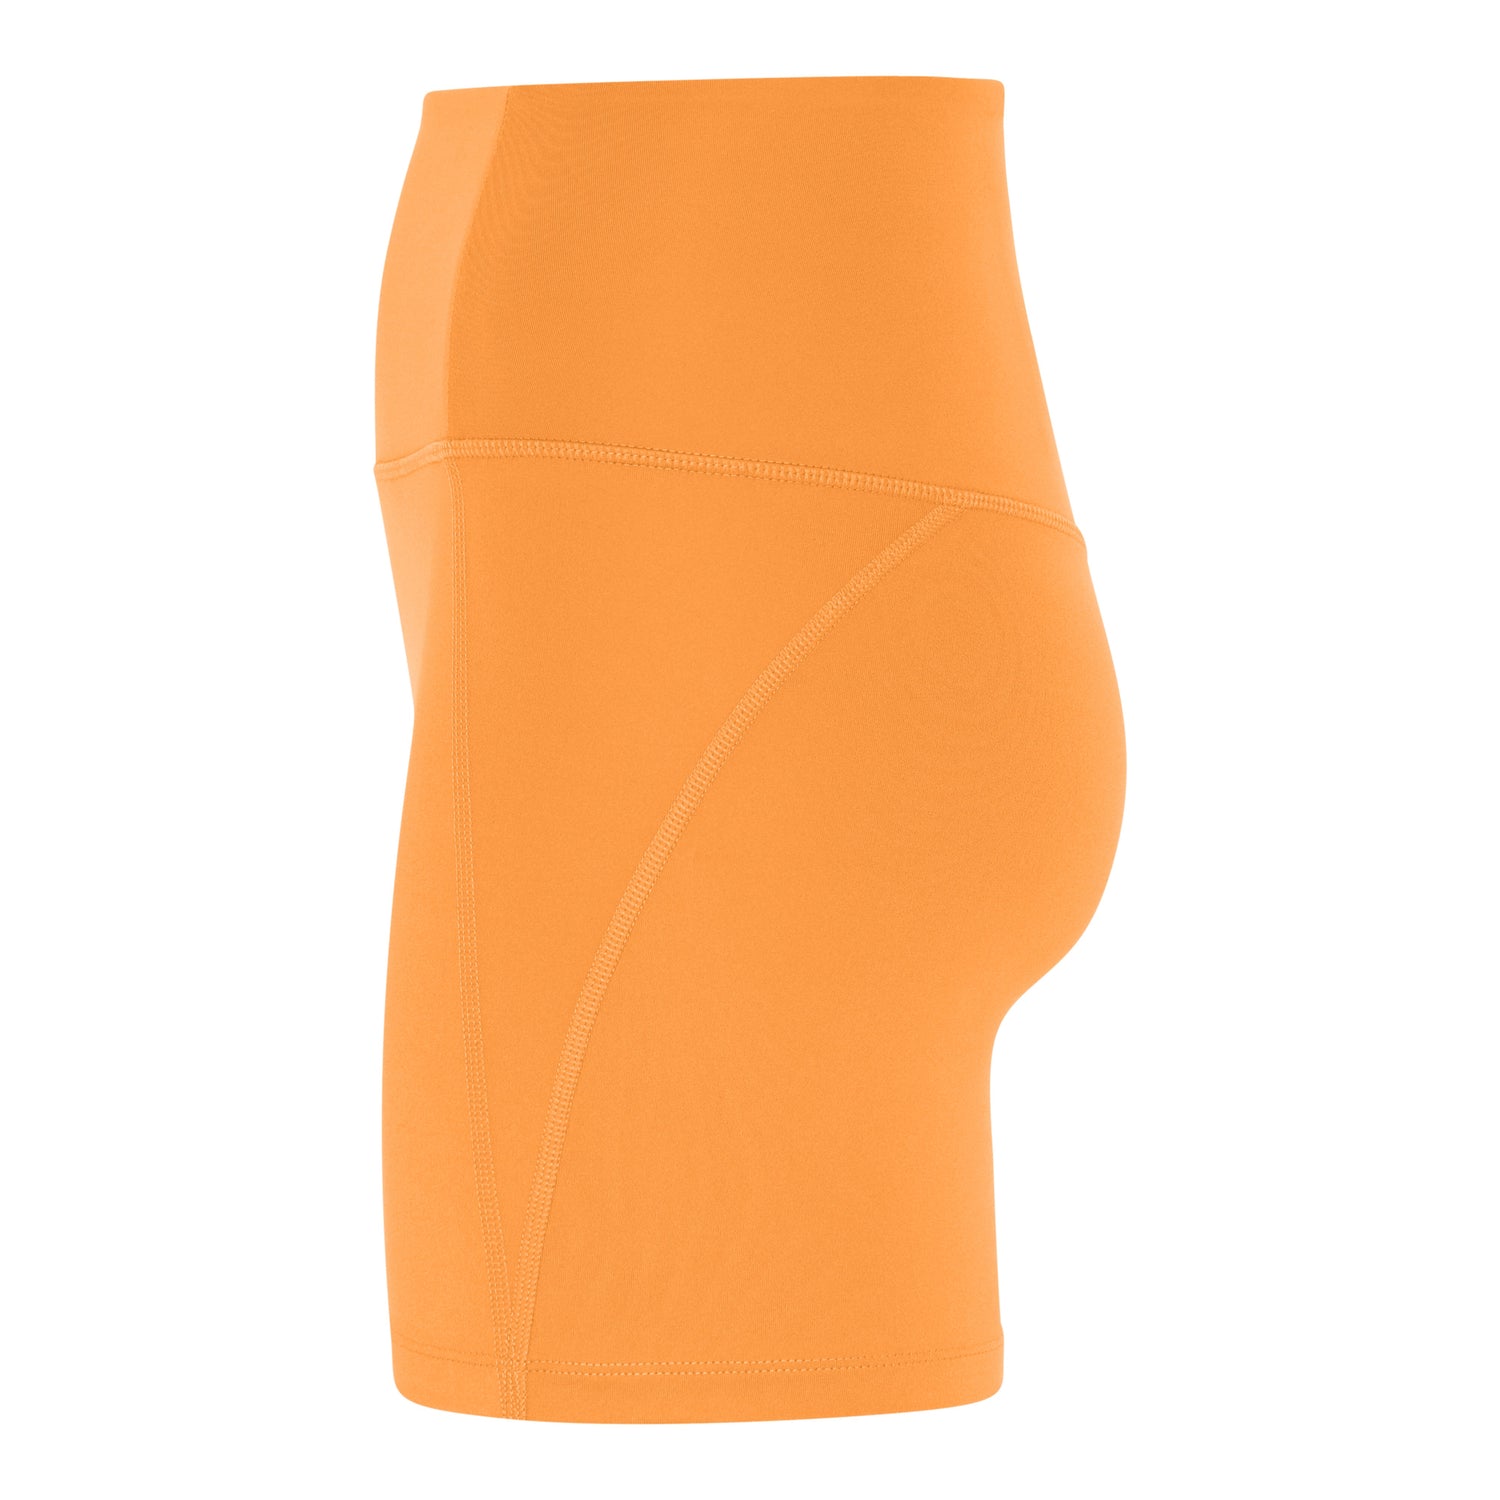 Girlfriend Collective Run Shorts High-Rise - Made from Recycled Plastic Bottles Orange Zest Pants